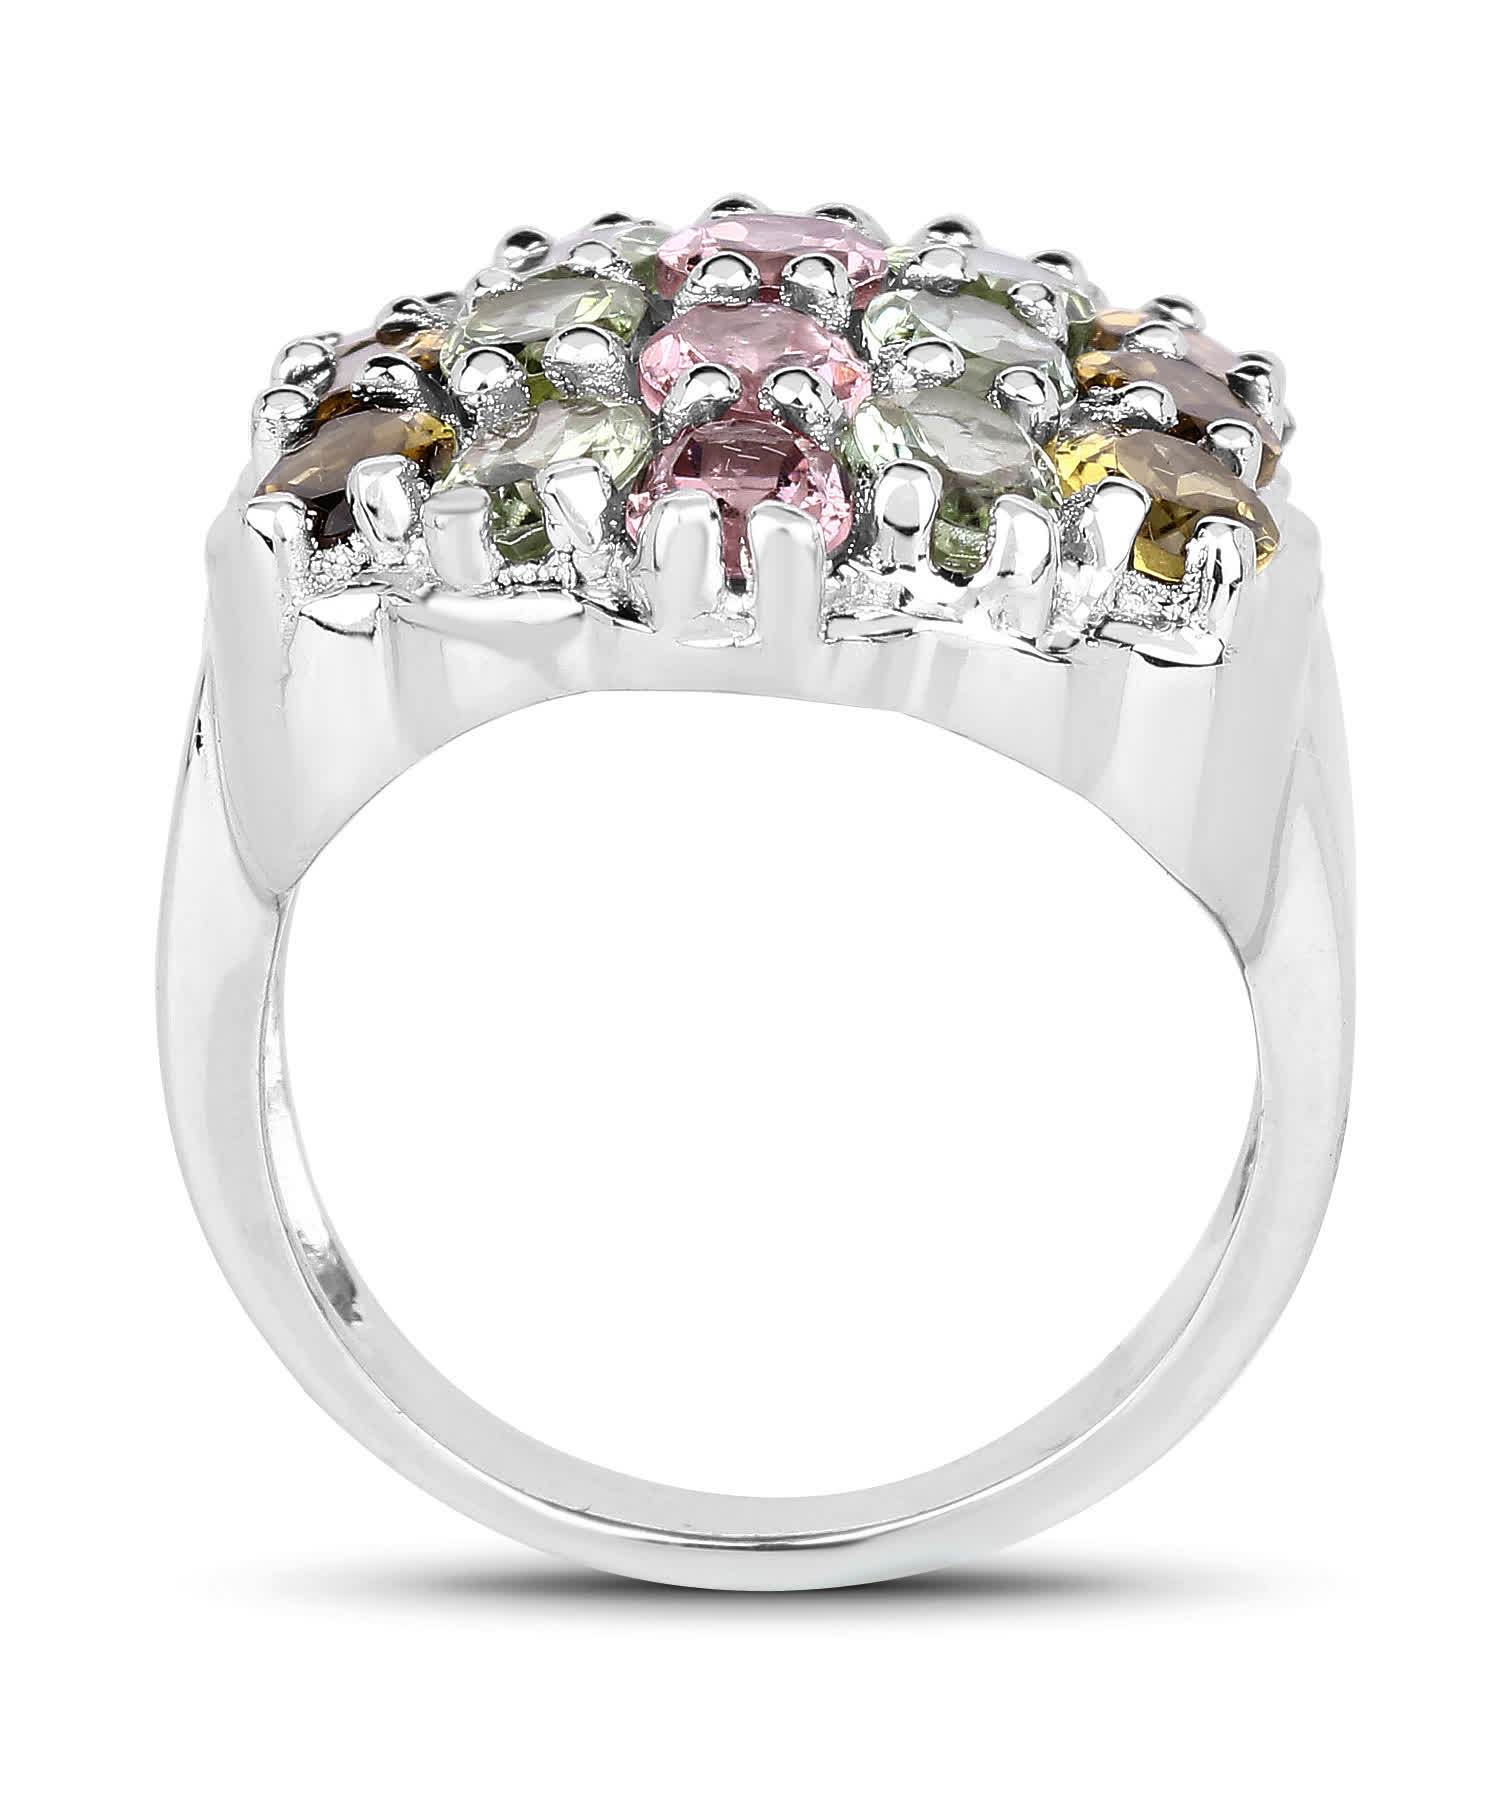 6.74ctw Natural Multi-Color Tourmaline Rhodium Plated 925 Sterling Silver Cocktail Ring View 2